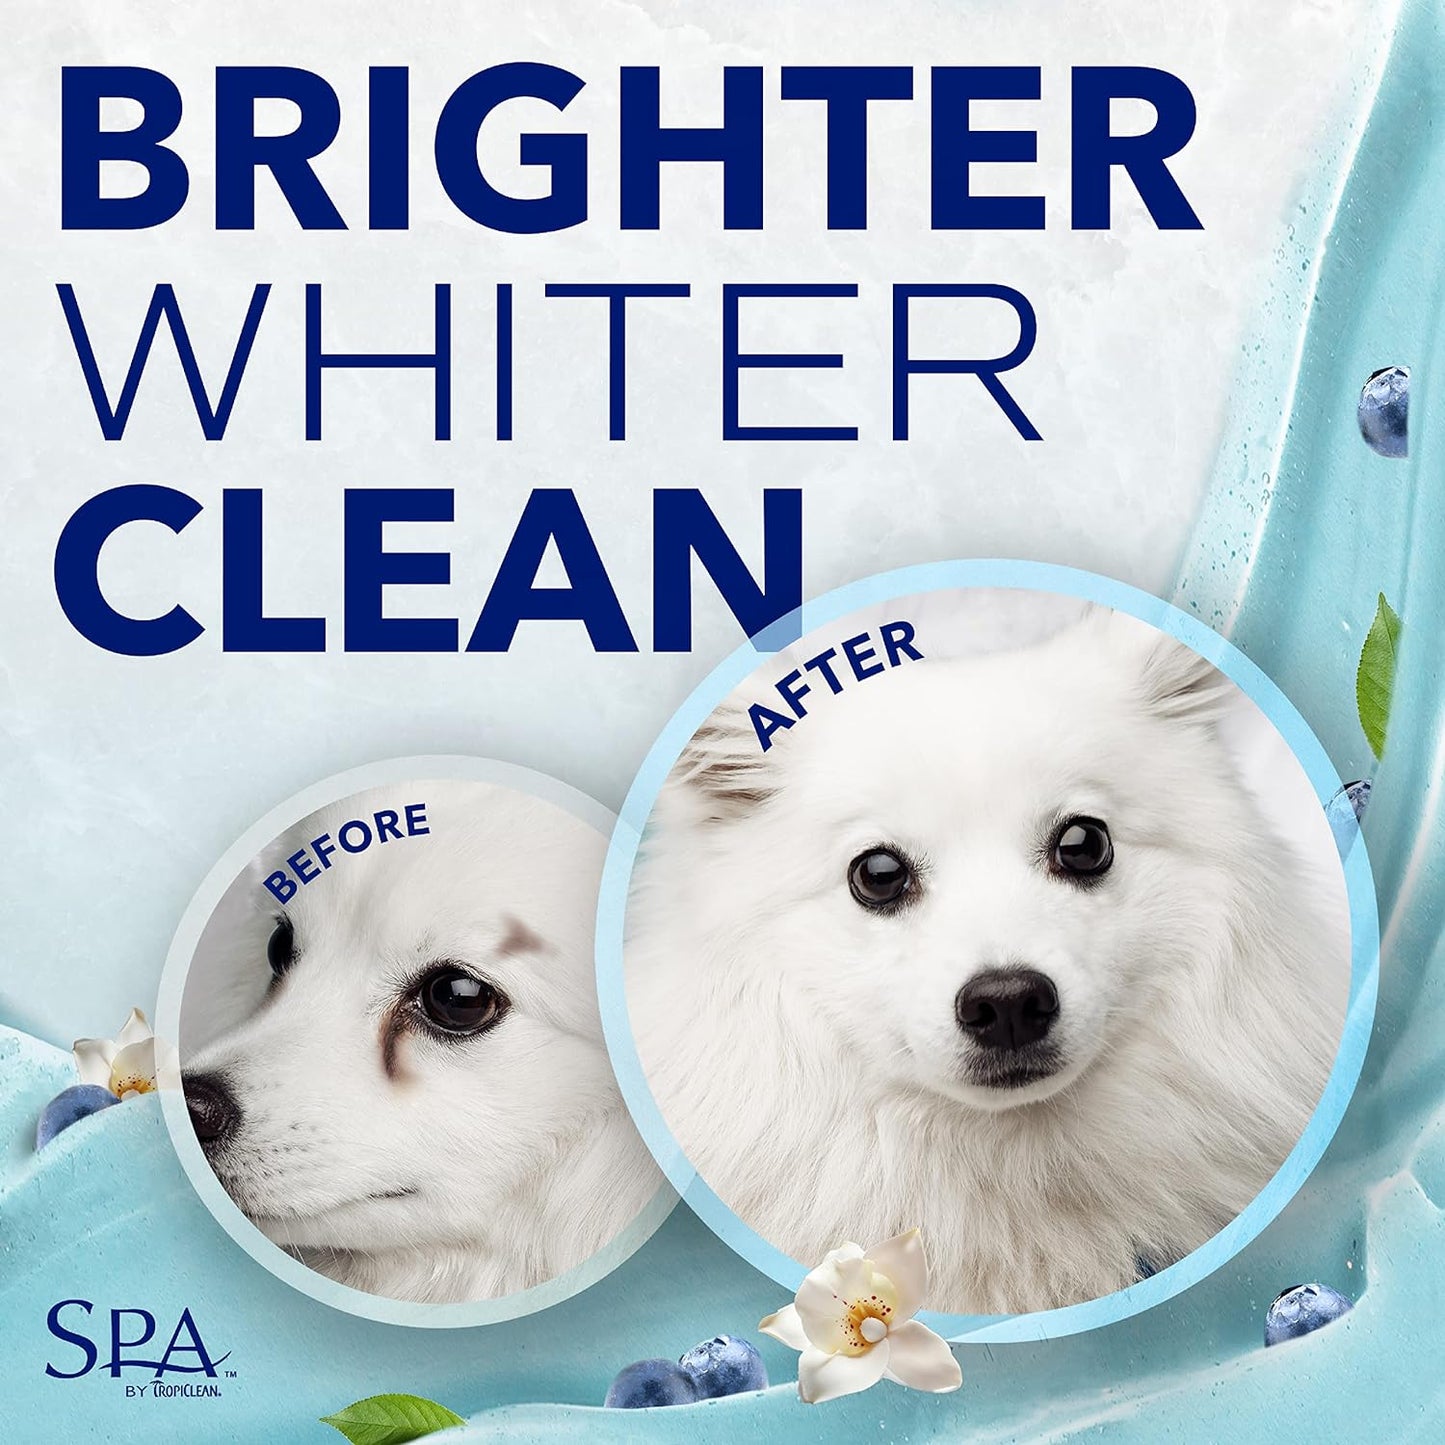 TropiClean SPA Shampoo Tear Stain Remover for Dogs | Oatmeal & Blueberry Scented Facial Cleanser for Dogs | Ideal for White Dogs & All Other Coats | Cat Friendly | Made in the USA | 1 Gallon